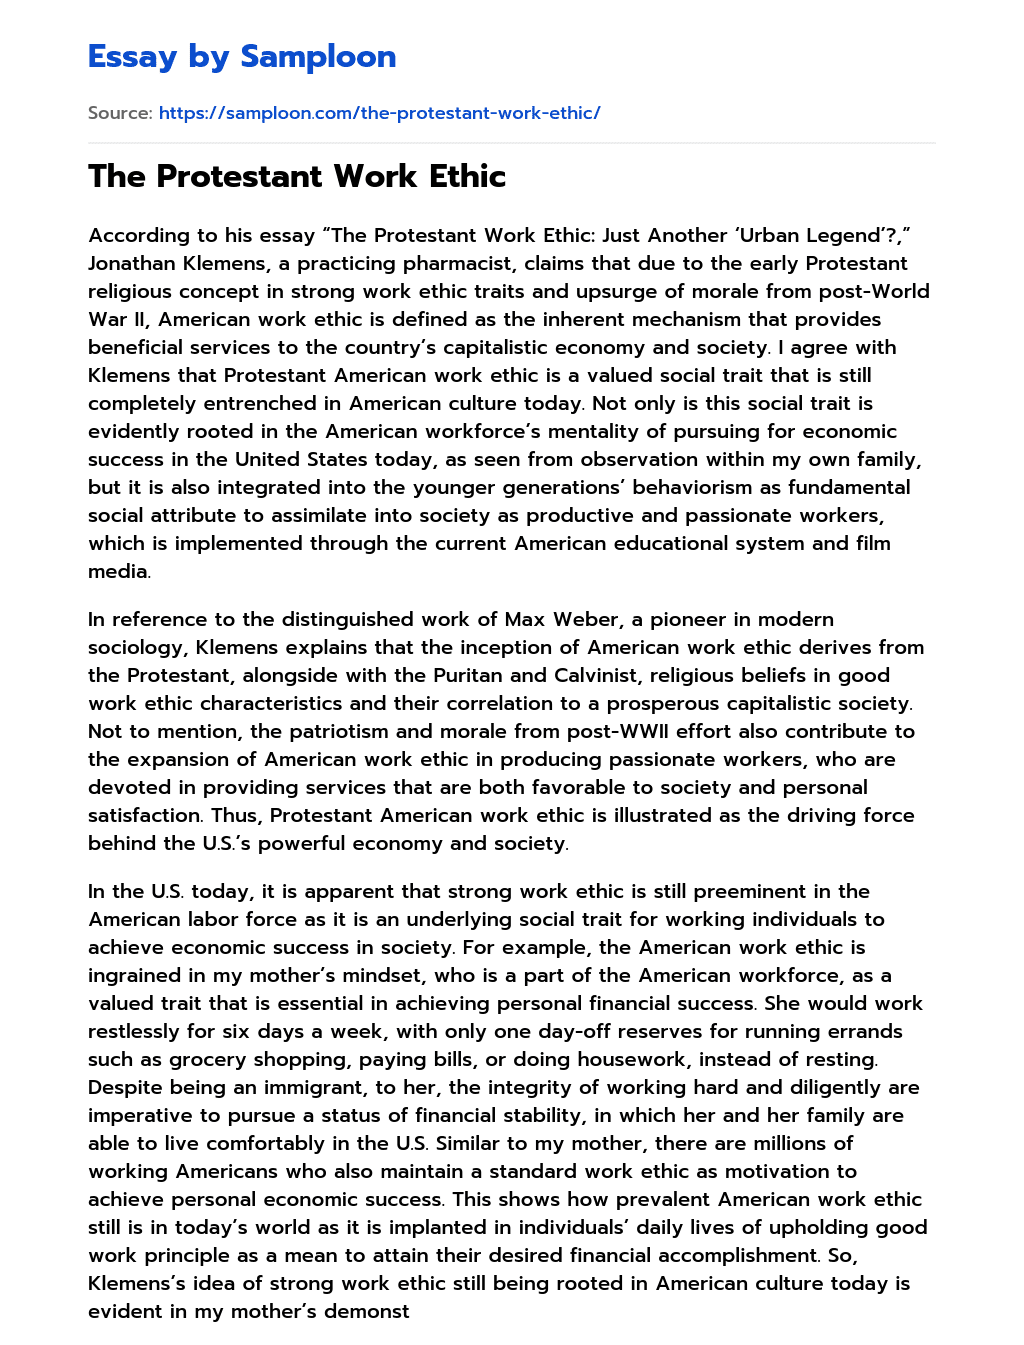 The Protestant Work Ethic essay